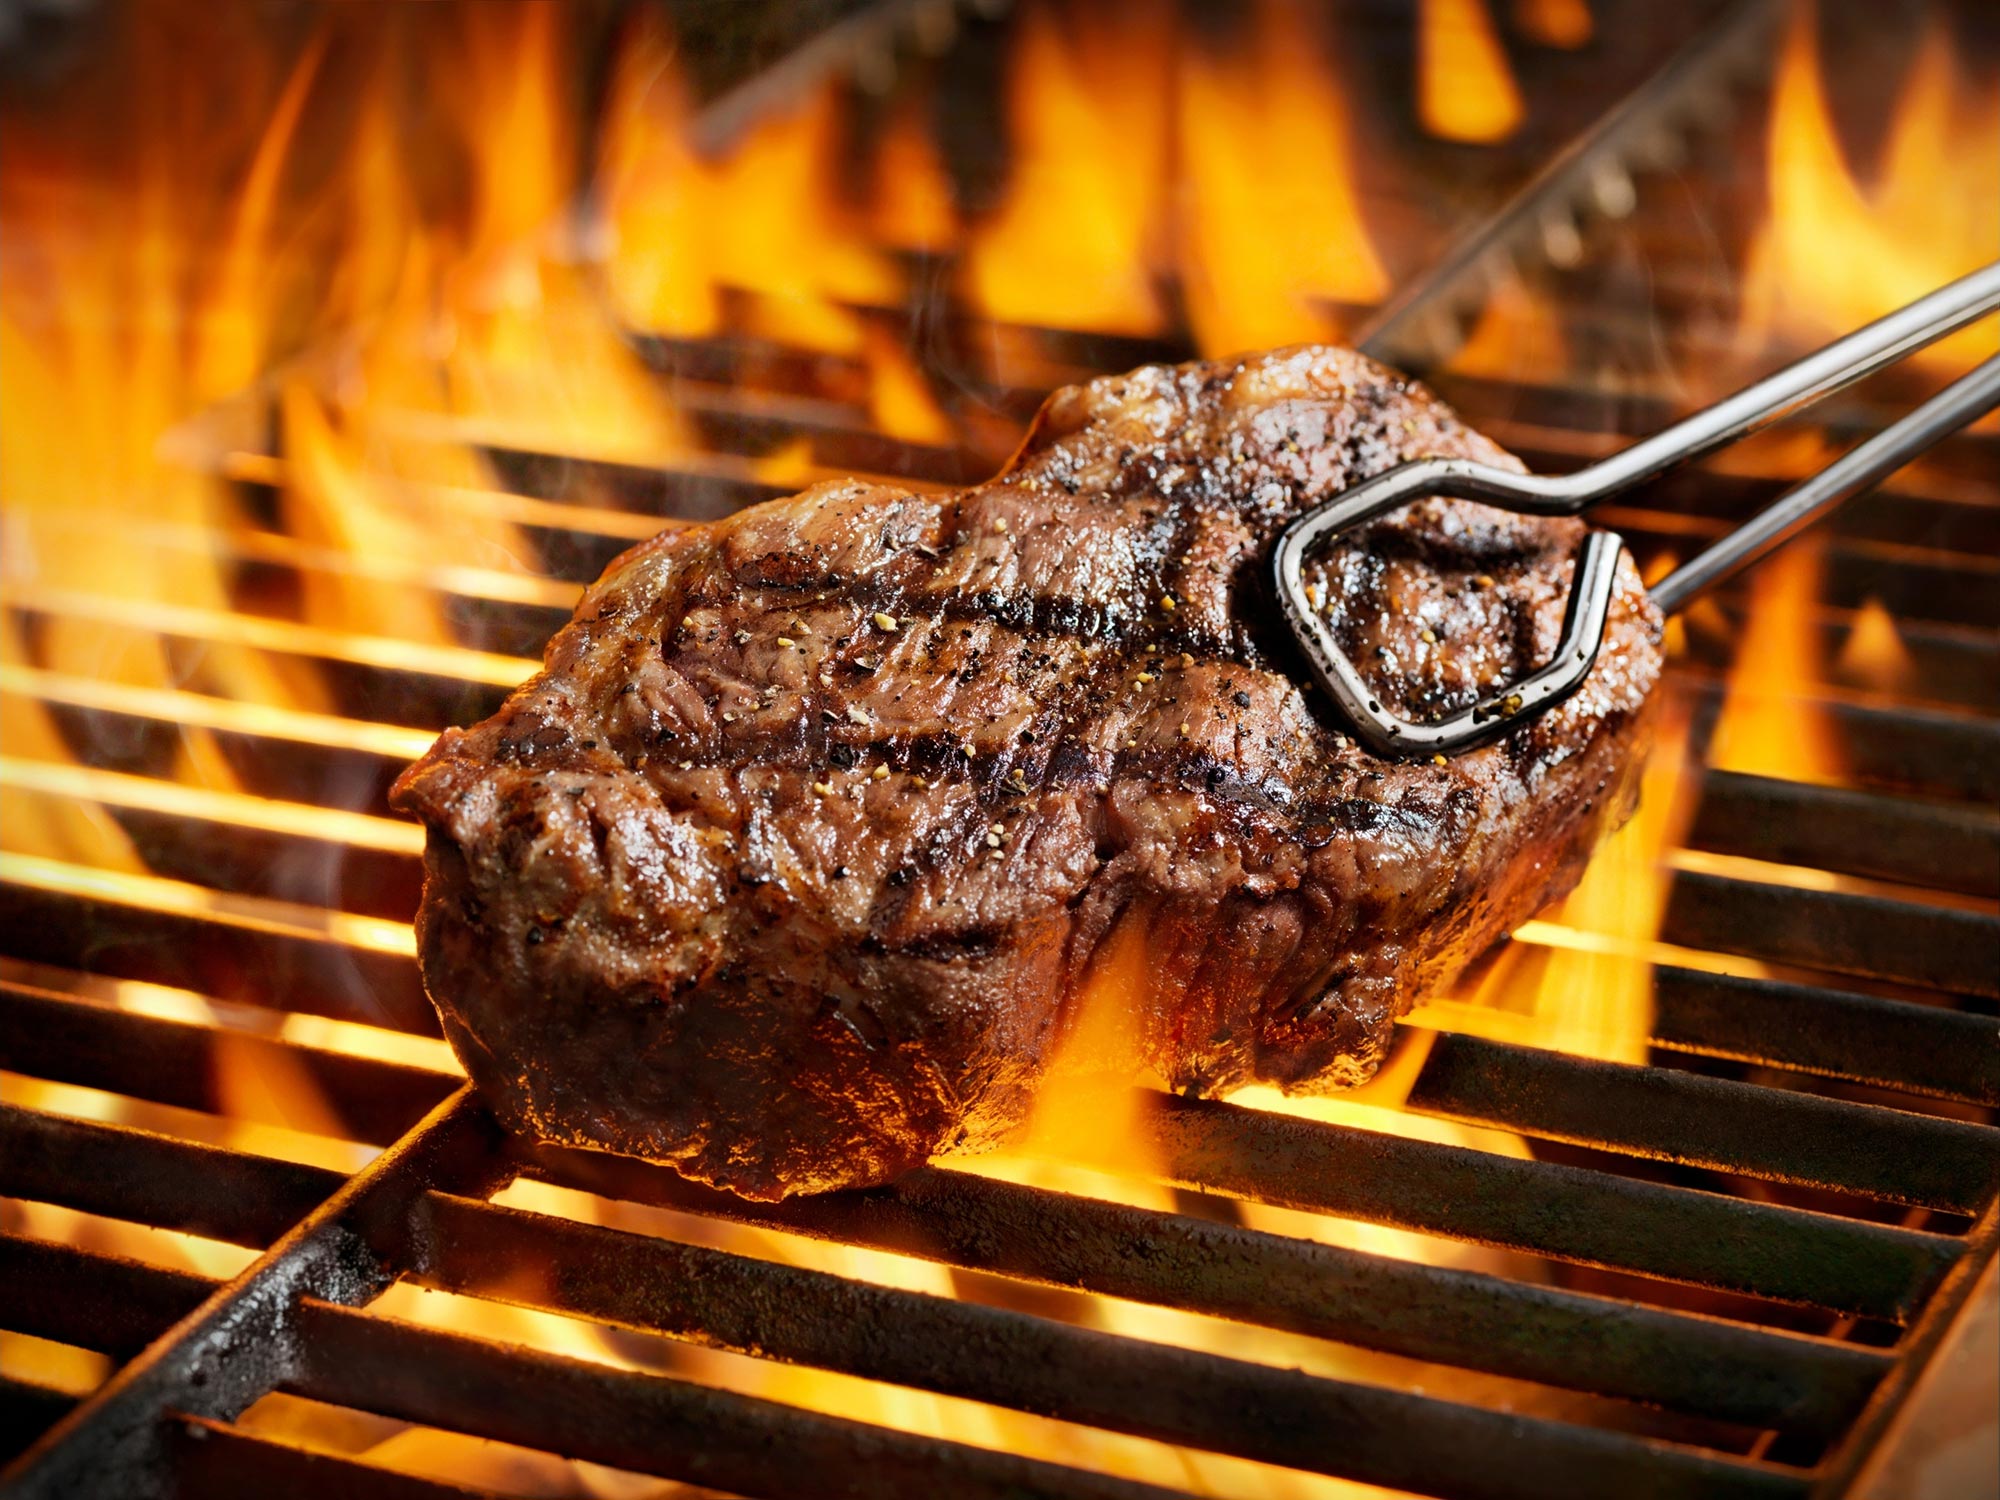 BBQ Cooking: Does Grilling Cause Cancer?